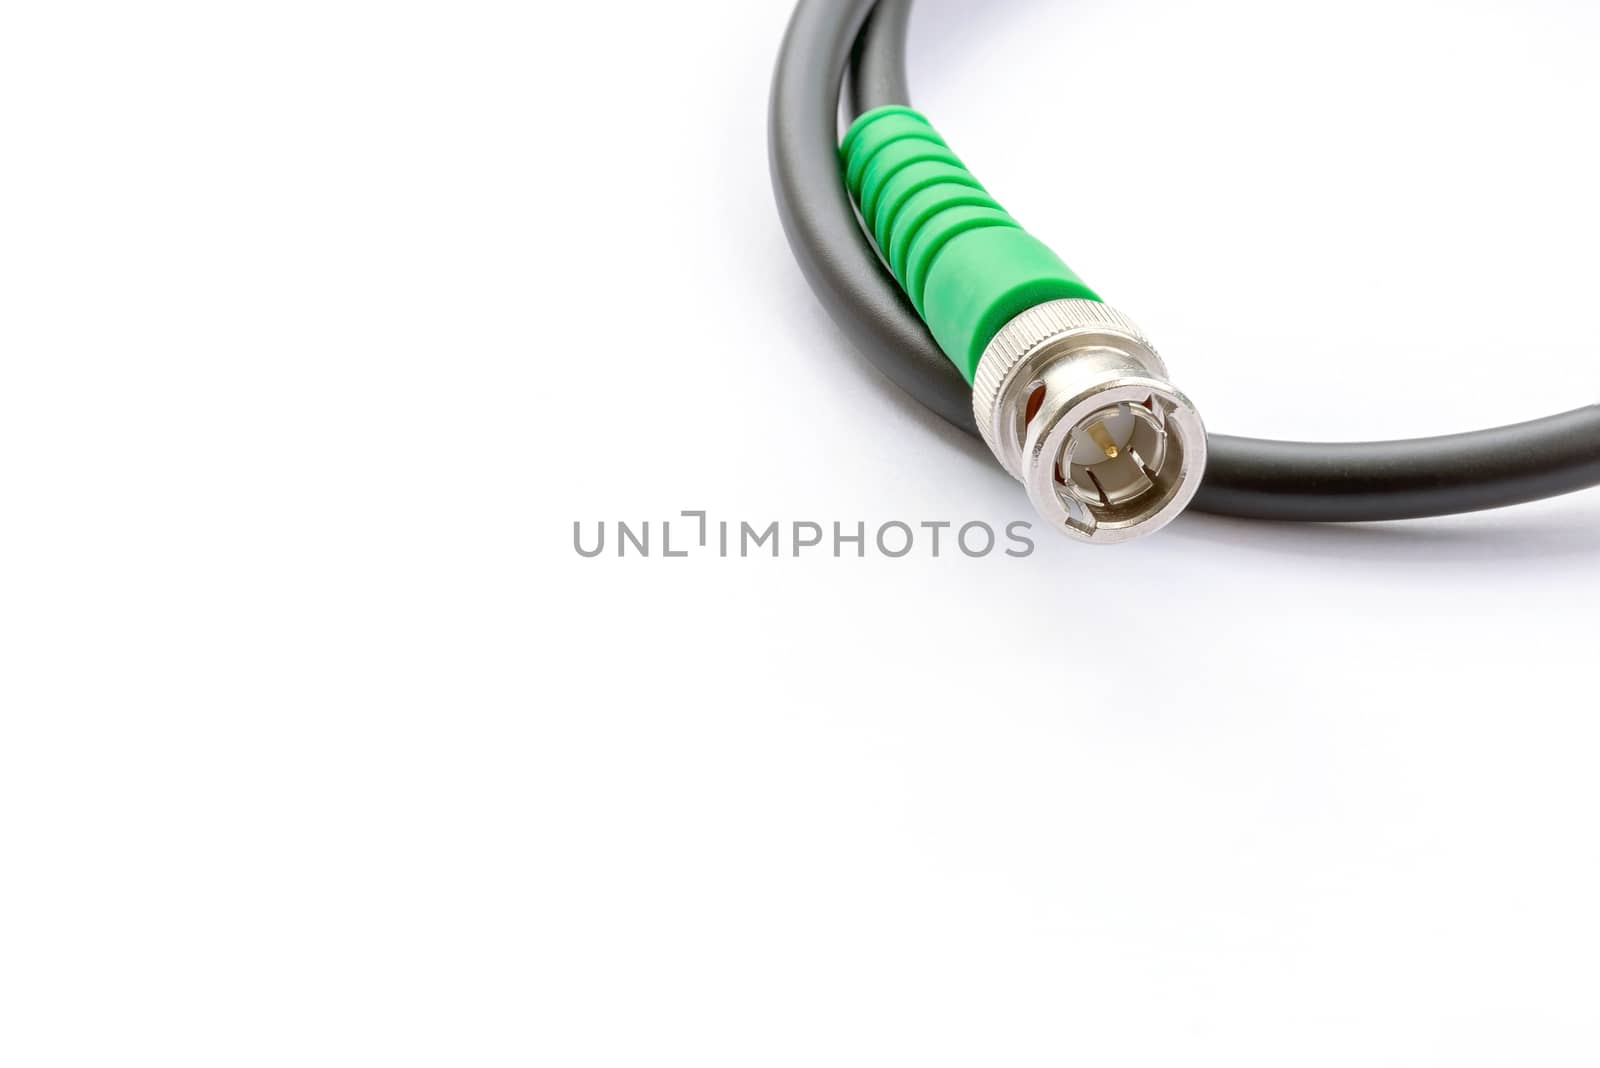 BNC connector jack with cable for video signal isolated on white background.